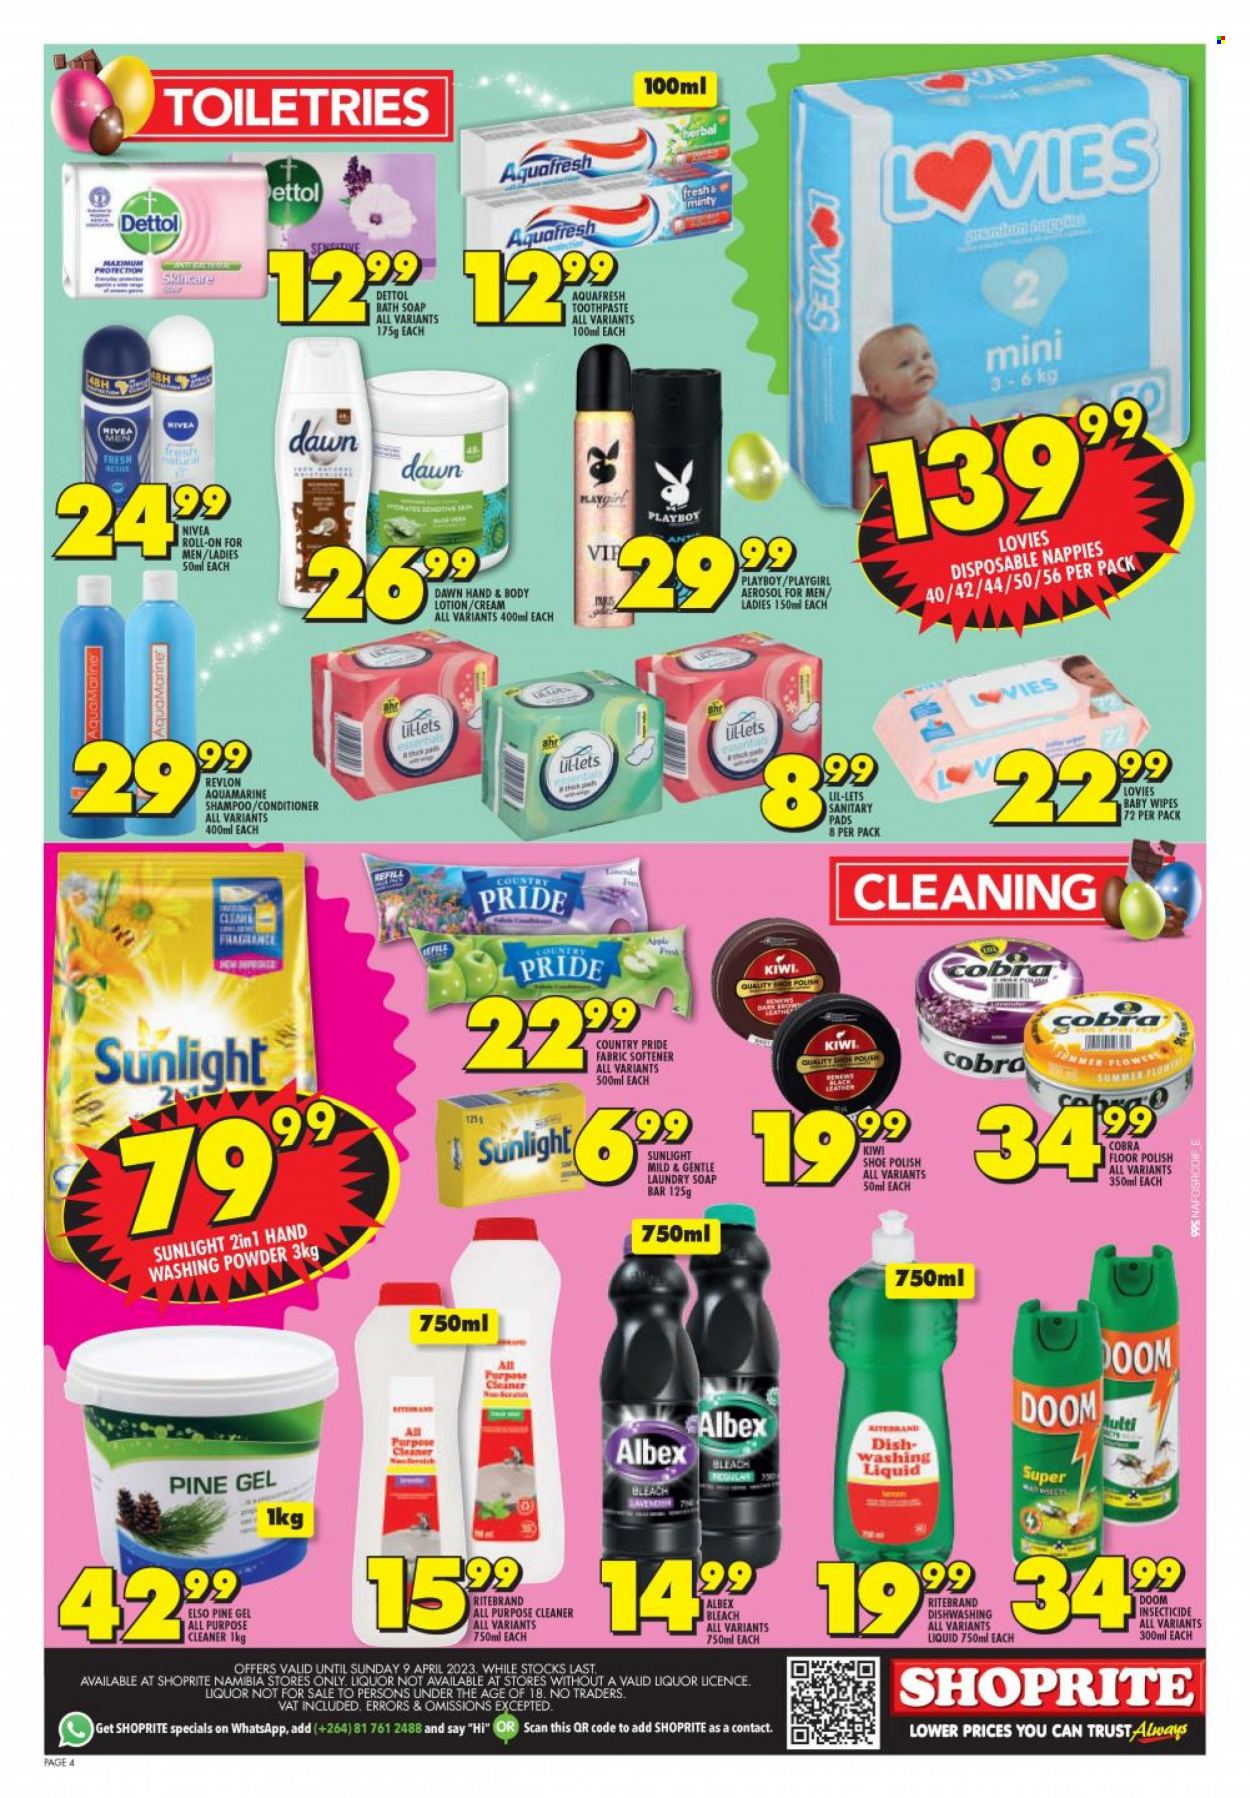 thumbnail - Shoprite catalogue  - 27/03/2023 - 09/04/2023 - Sales products - kiwi, beer, Cobra, wipes, baby wipes, nappies, Dettol, bleach, all purpose cleaner, cleaner, fabric softener, laundry powder, laundry soap bar, Sunlight, shampoo, Nivea, soap bar, soap, toothpaste, sanitary pads, Lil-lets, conditioner, Revlon, body lotion. Page 3.